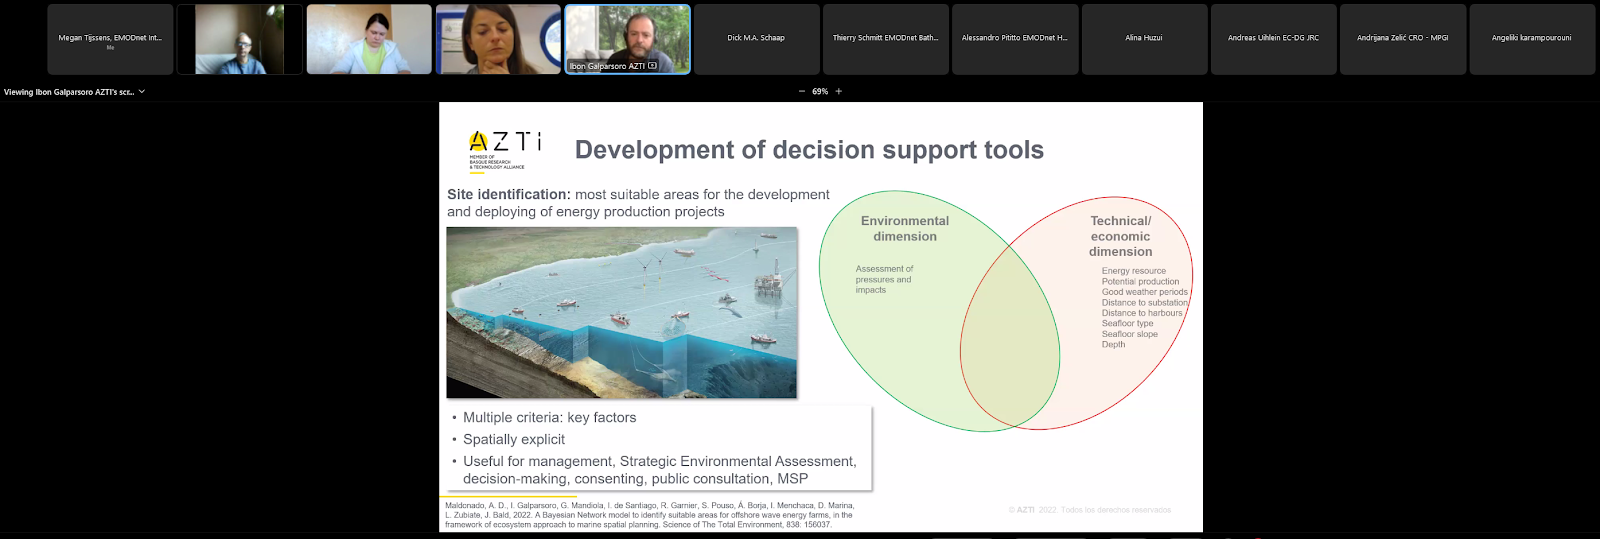 Integration of EMODnet data portal information into decision support tools to identify suitable areas for offshore renewable energy projects